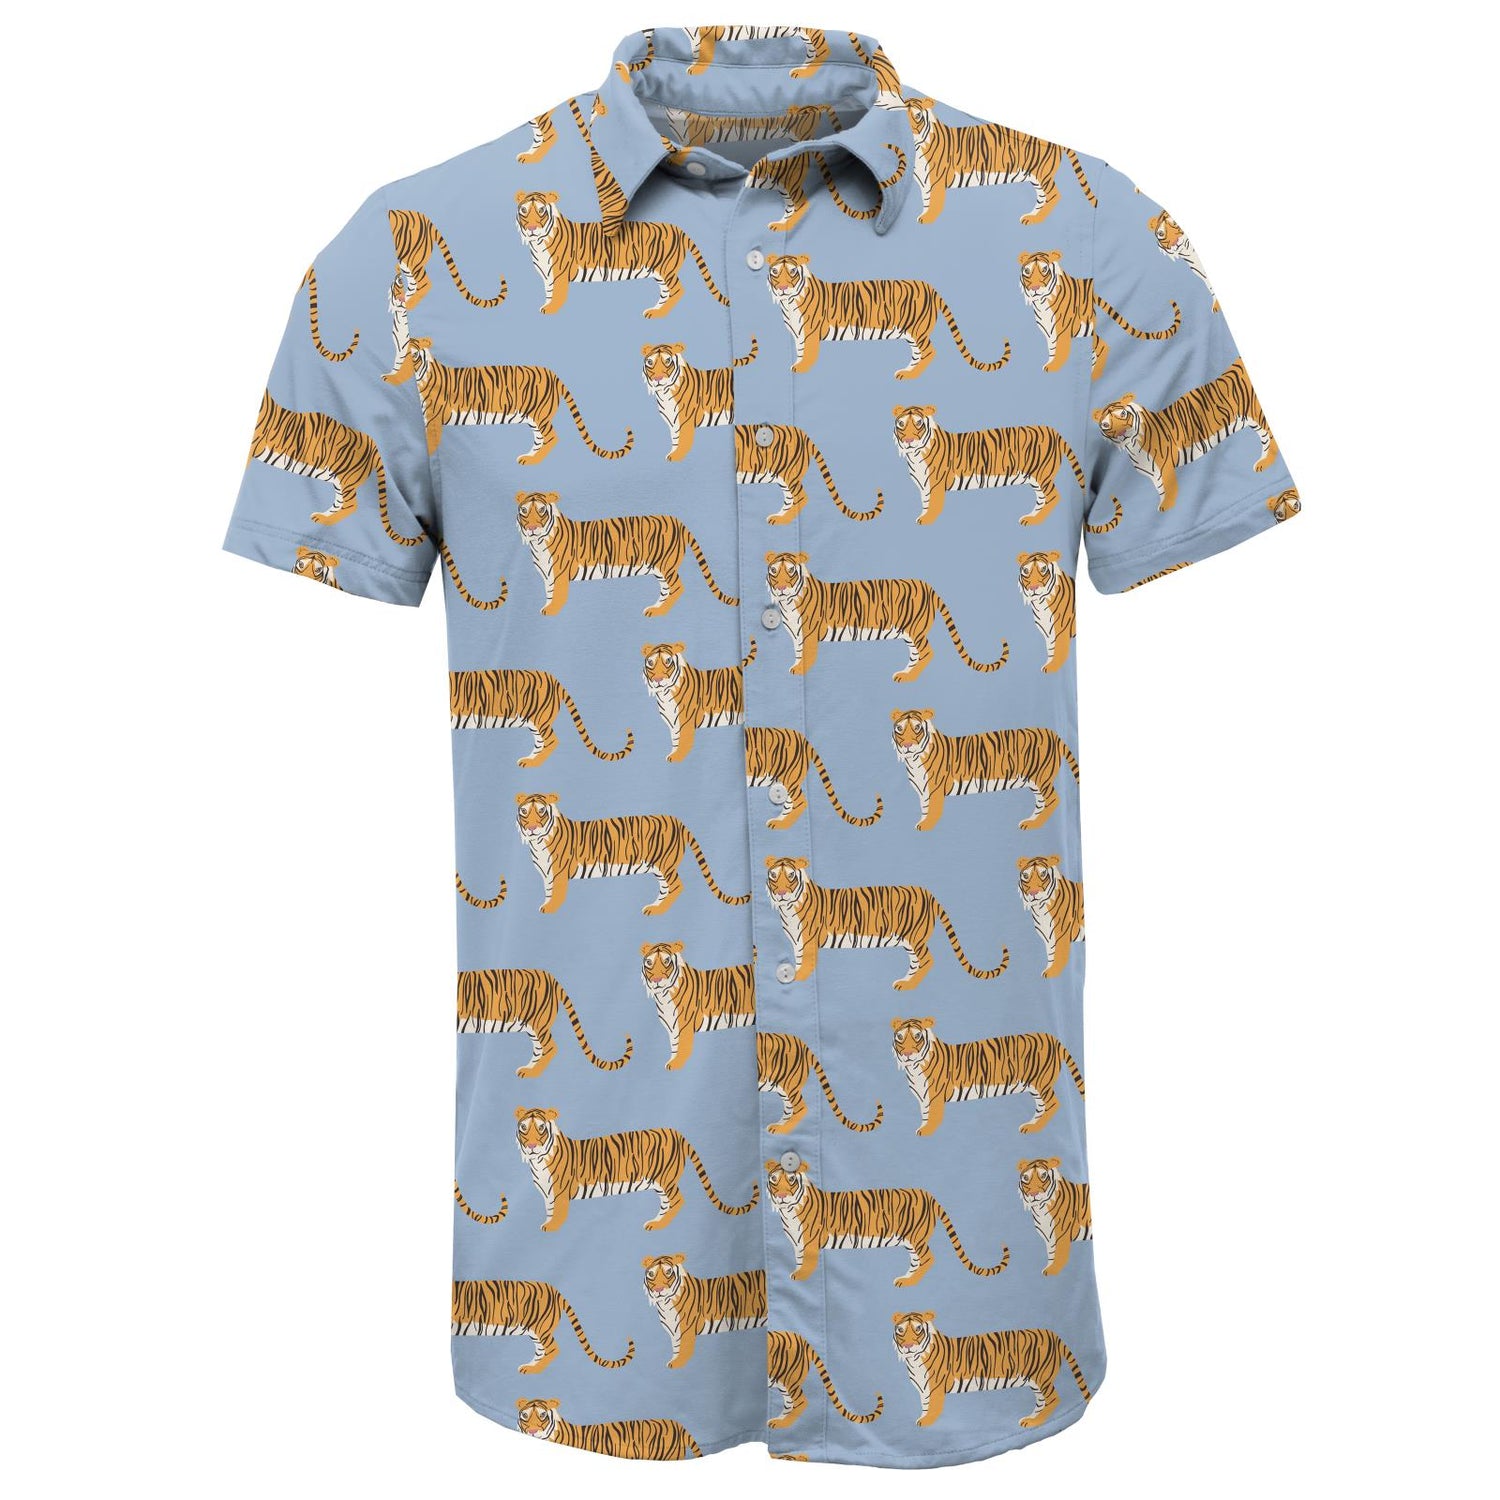 Men's Print Short Sleeve Luxe Jersey Button Down Shirt in Pond Tiger